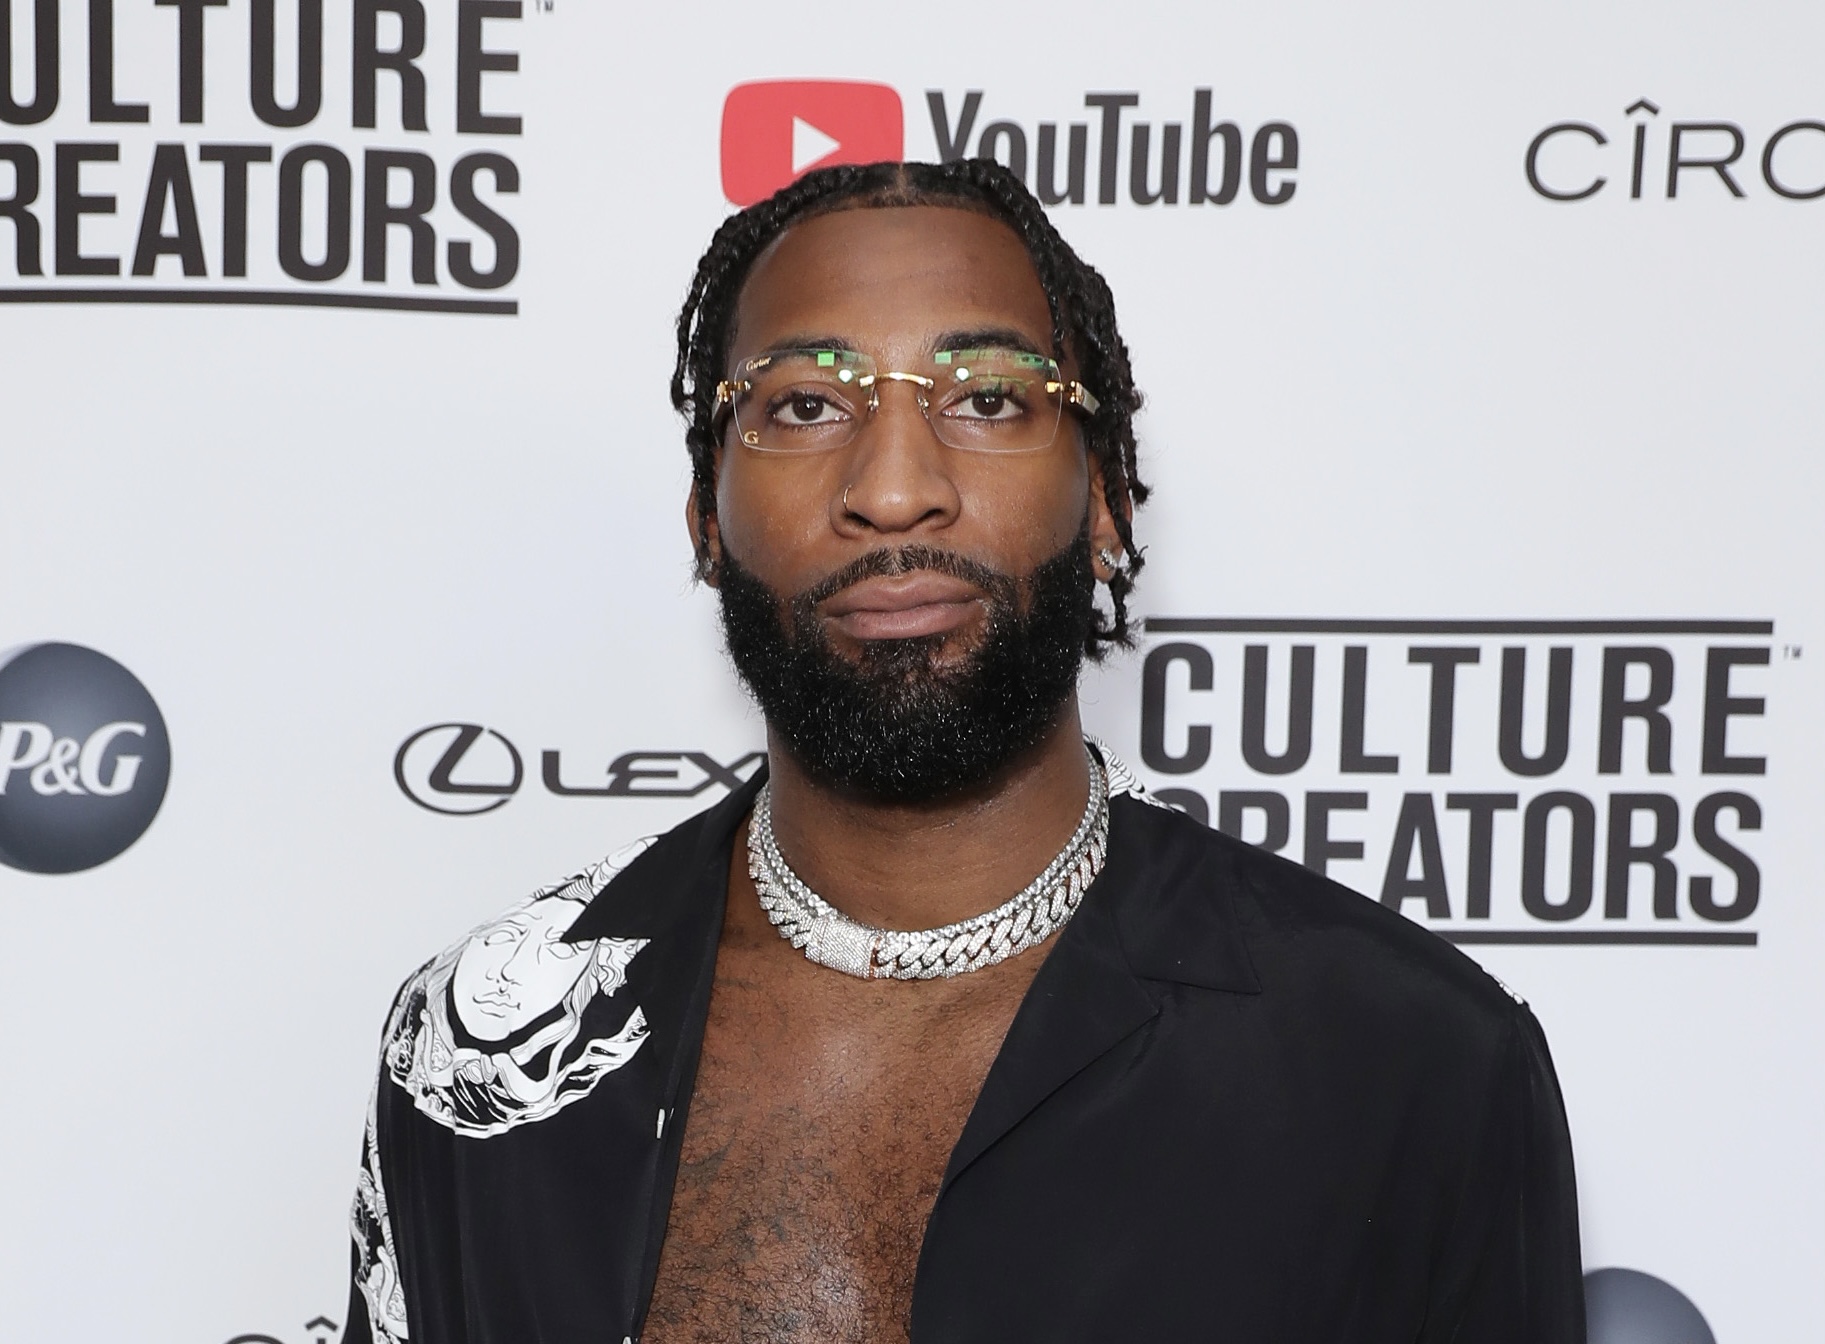 Chicago Bulls Star Andre Drummond Shares His Sense of Scents With New Business Venture